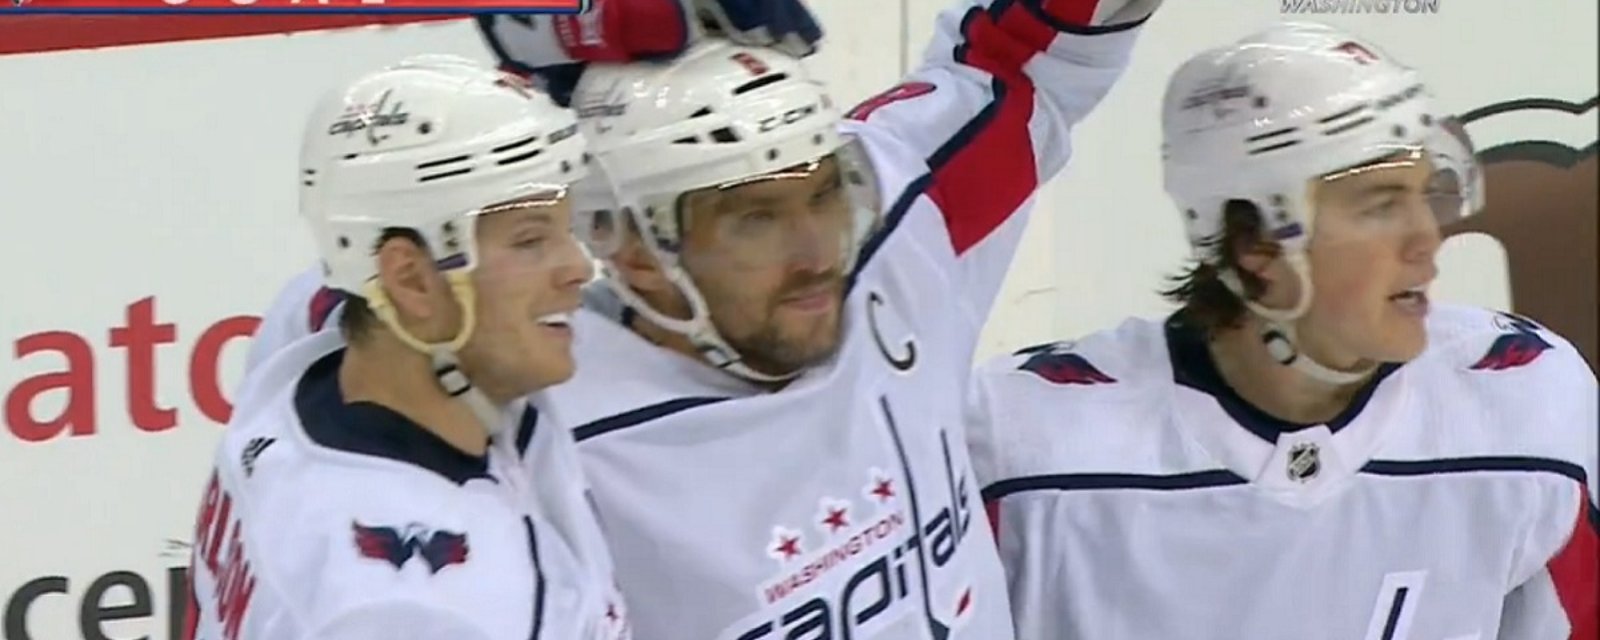 Ovechkin scores his 9th goal in 5 games with a ridiculous shot.